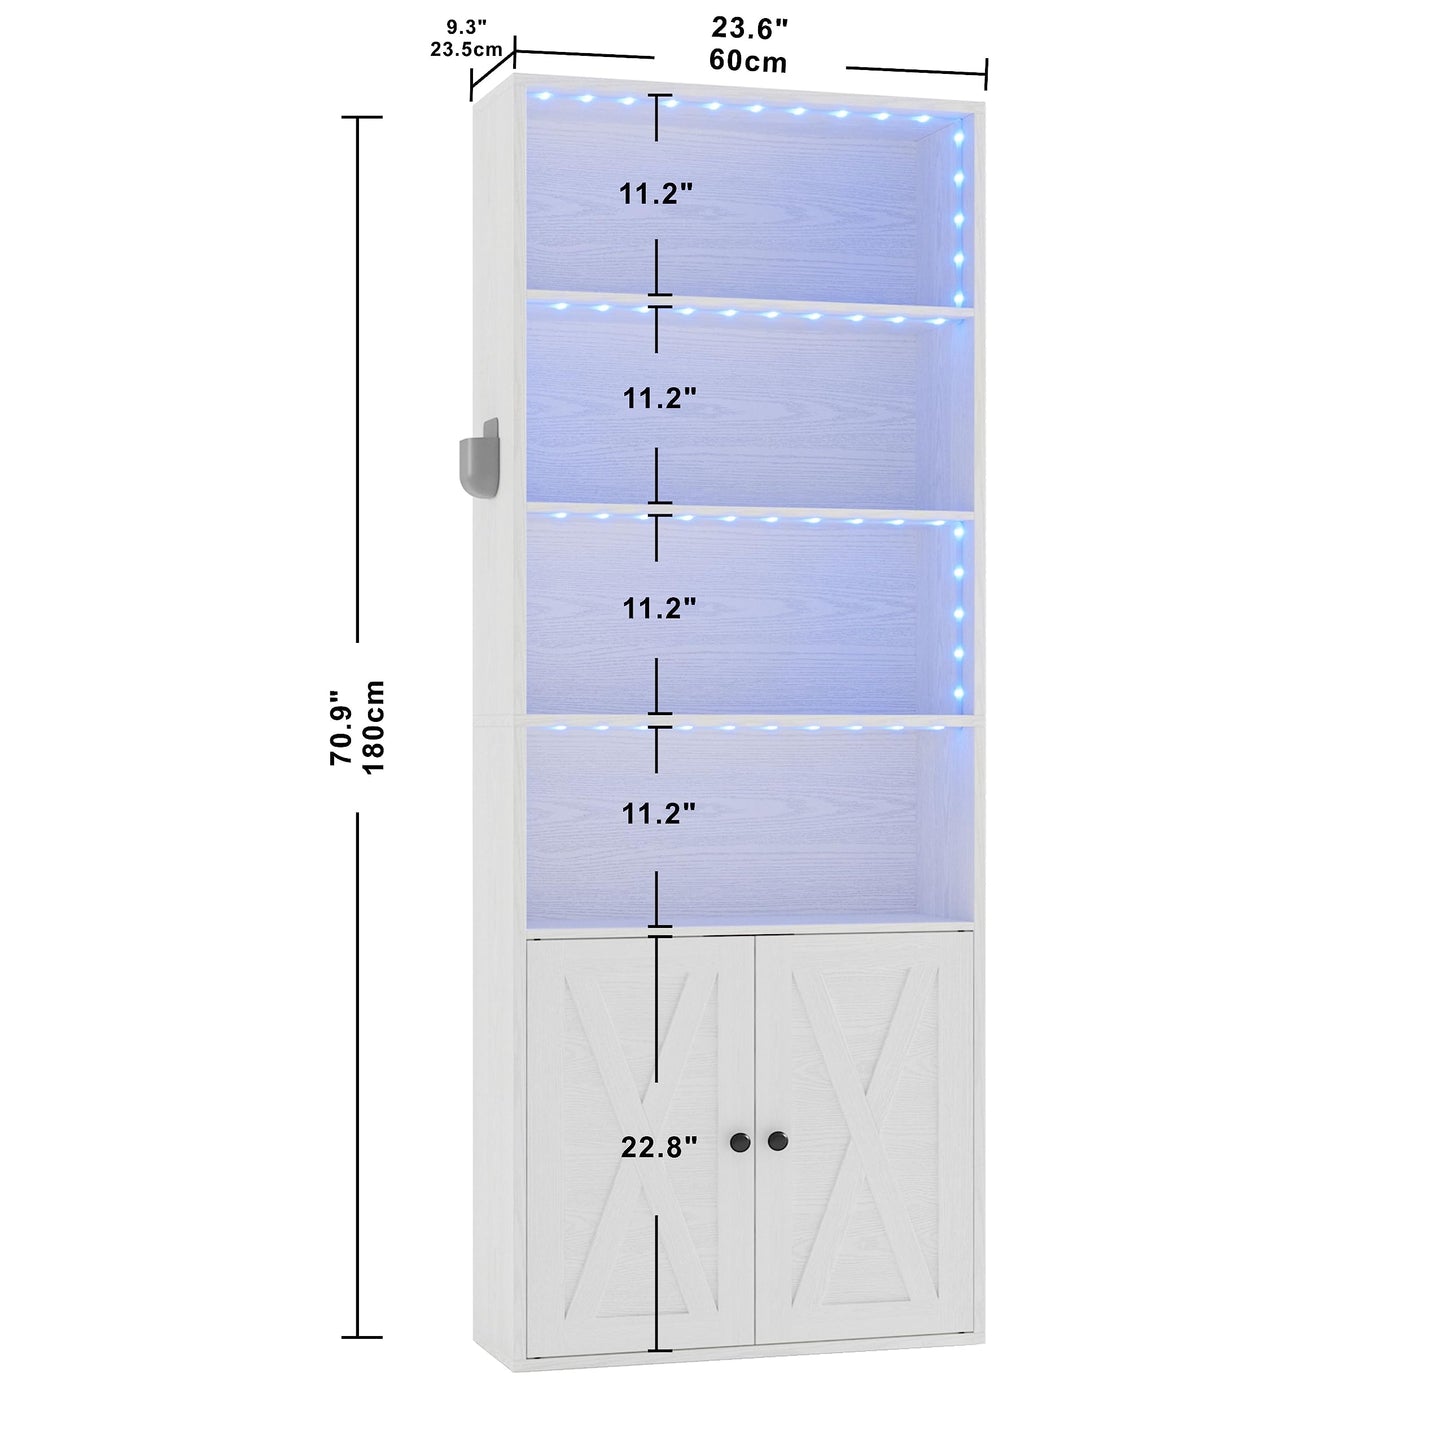 IRONCK Tall Bookcase with LED Lights, 70 in Industrial Bookshelf Display Shelf Floor Standing for Home Office, Living Room, Bed Room